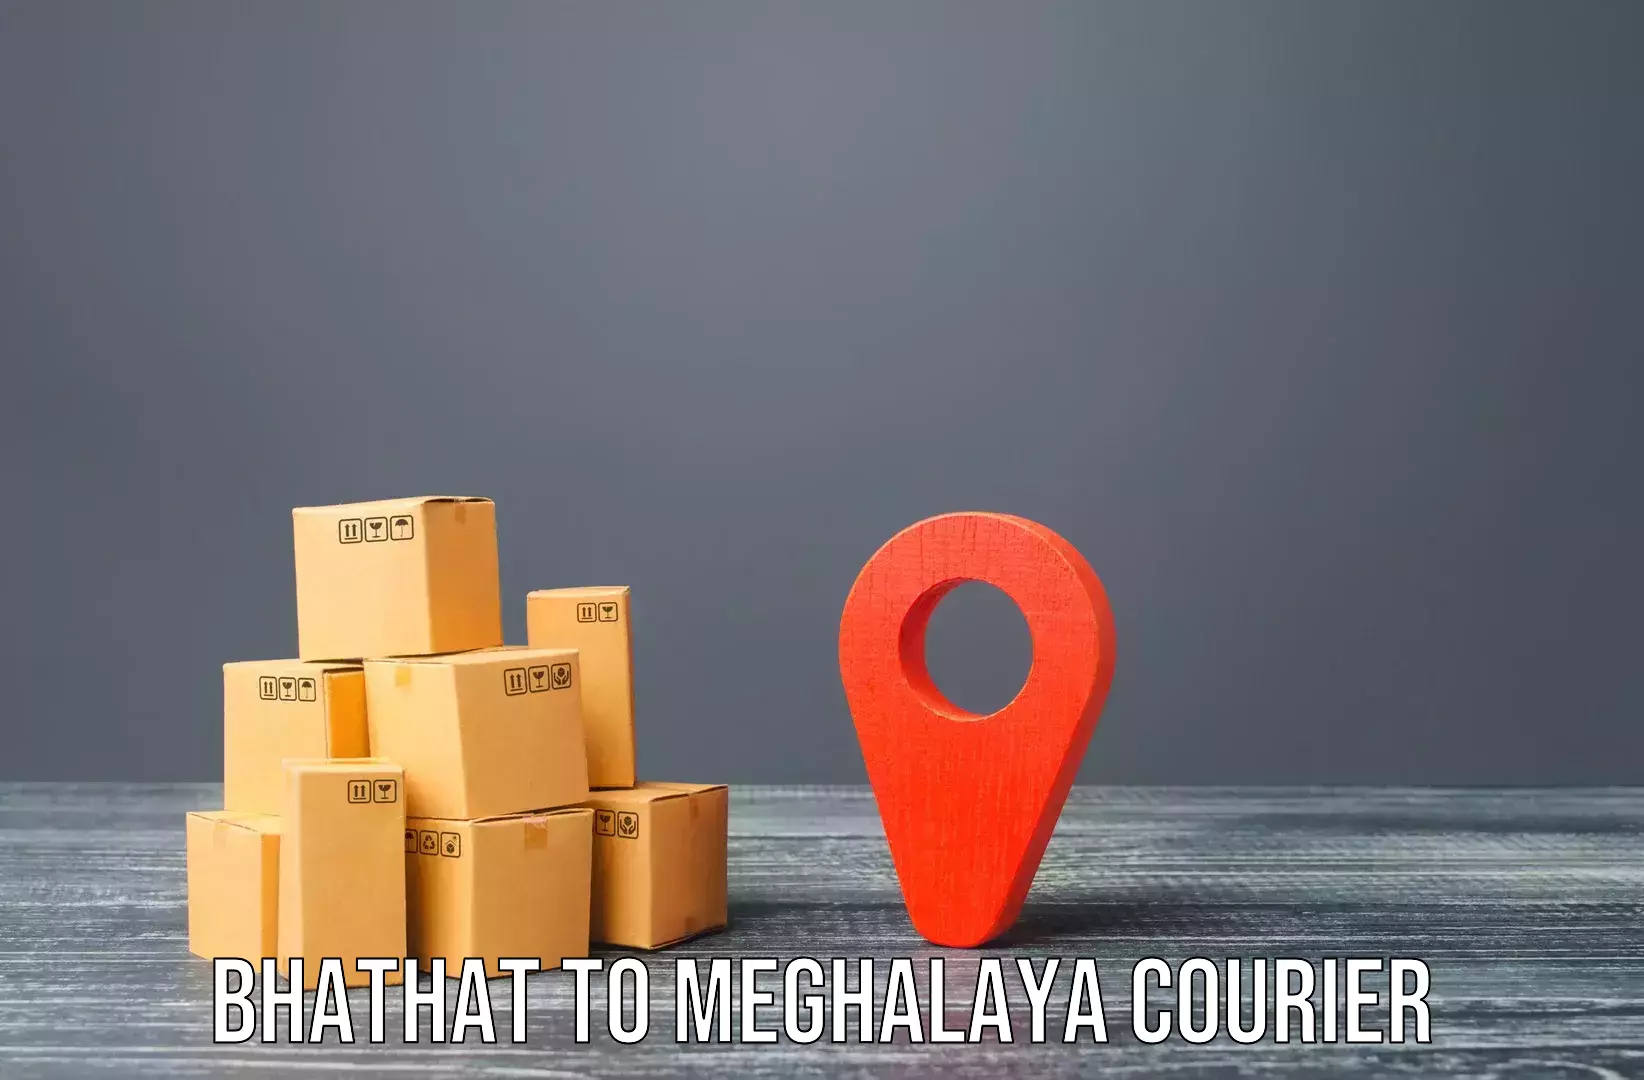 Furniture moving experts in Bhathat to Shillong